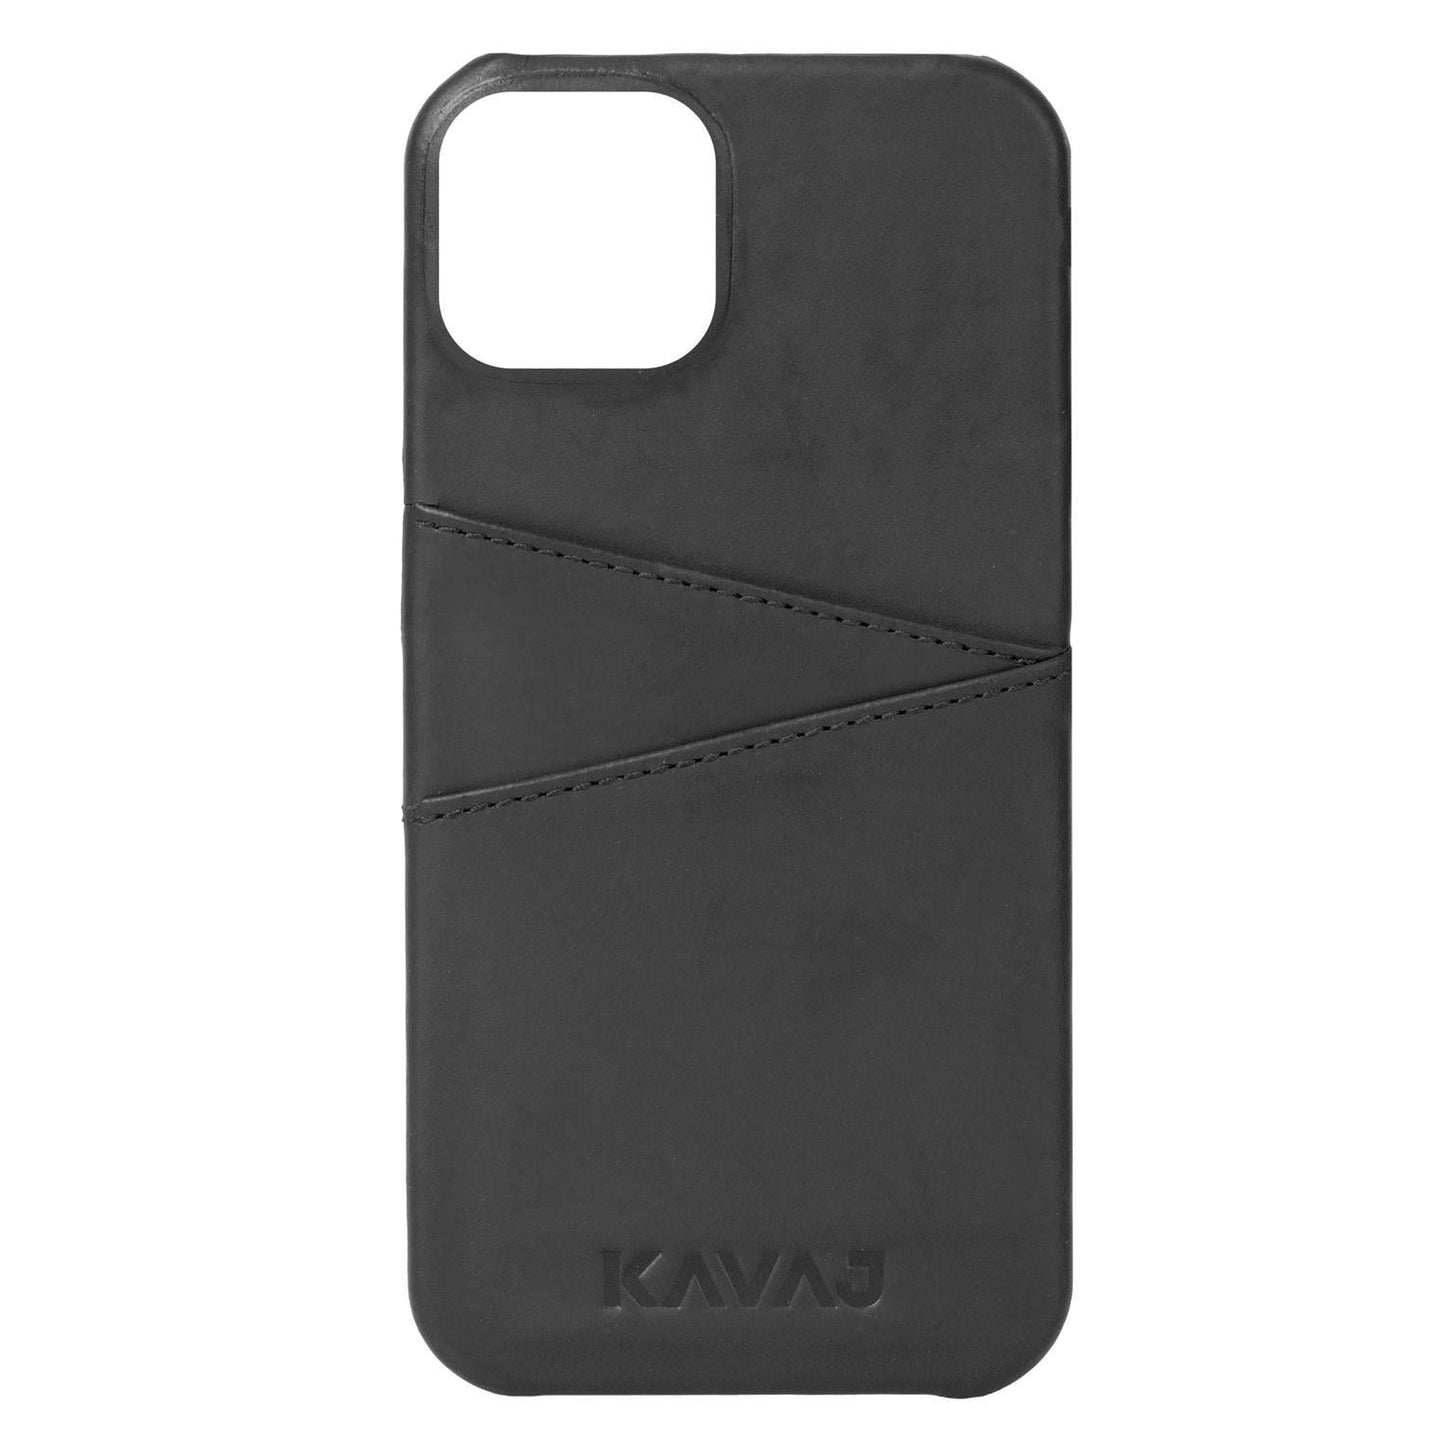 iPhone 13 Pro Max leather cases with card slots Chicago